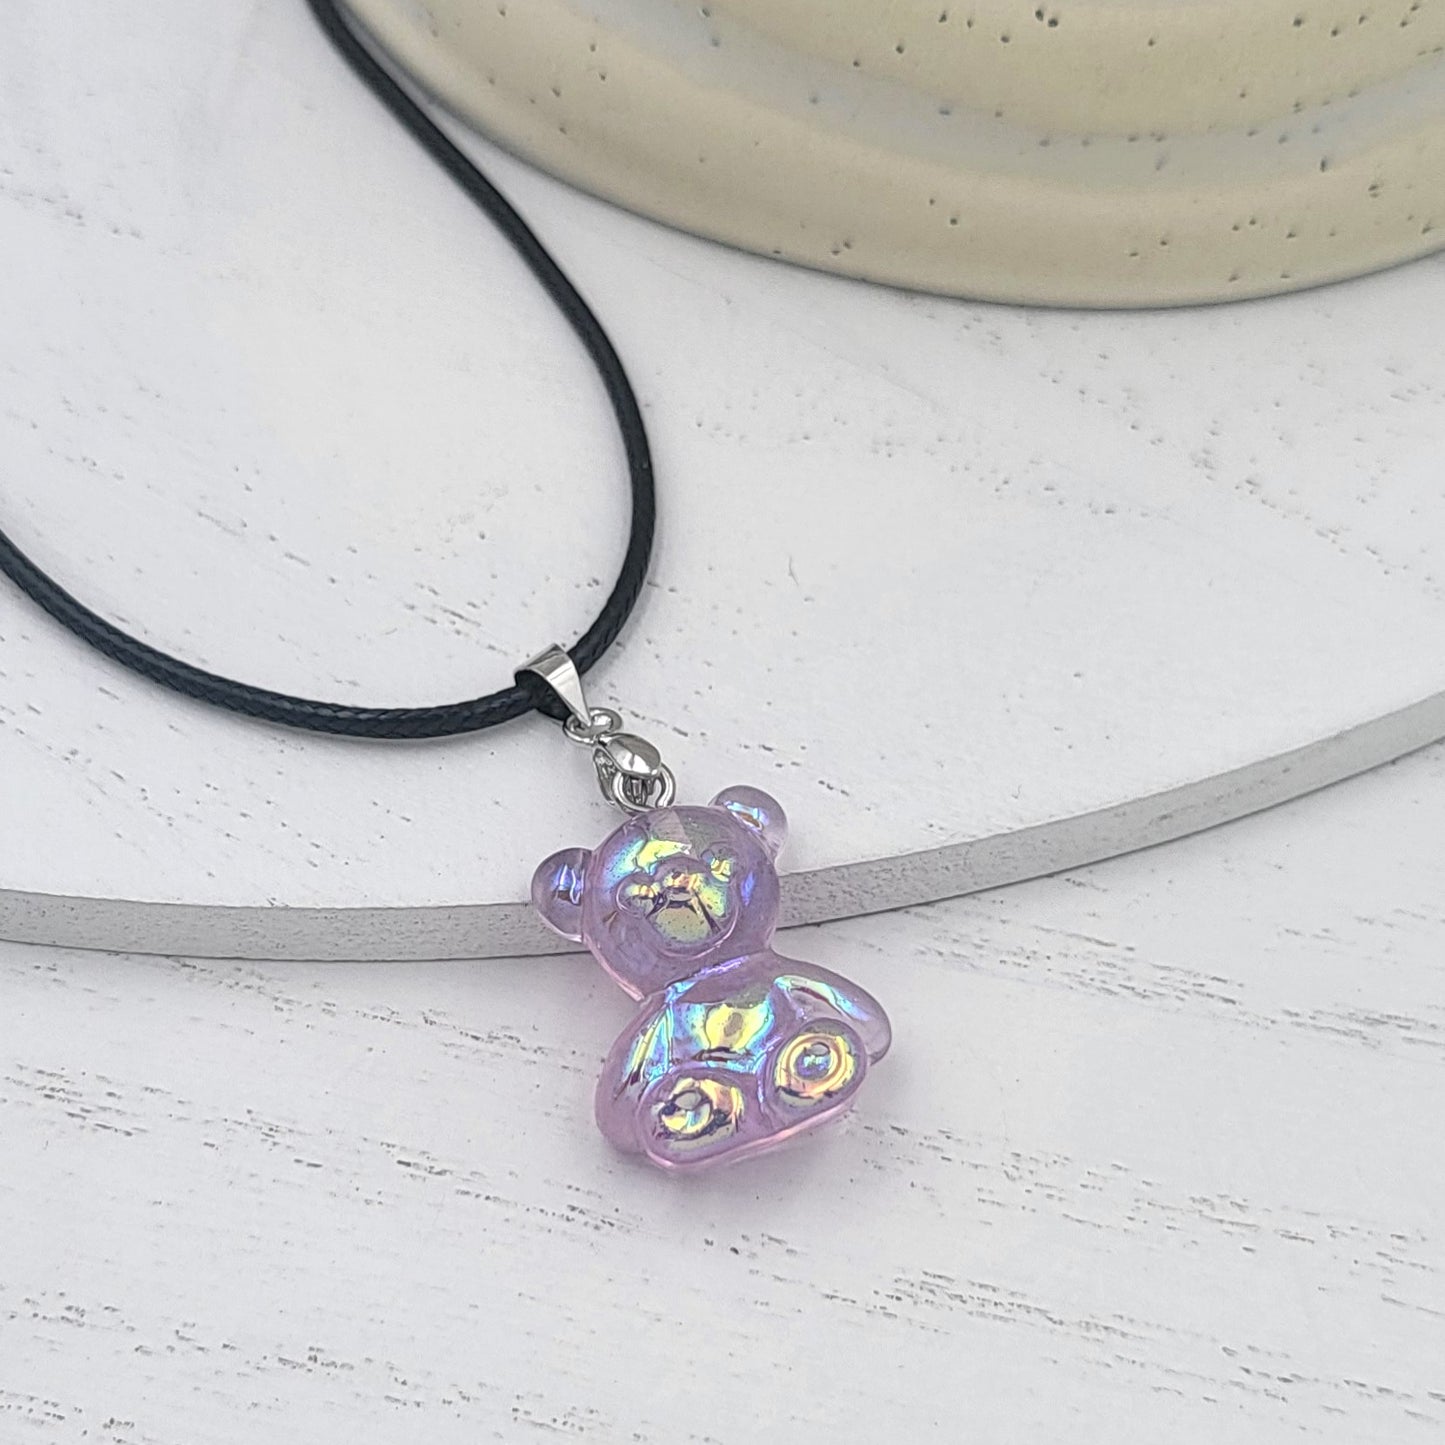 BESHEEK Silvertone and Purple Resin Gummy Bear Pendant Necklace | Hypoallergenic Boho Kitchsy Artistic Funky Cute Style Fashion Necklace